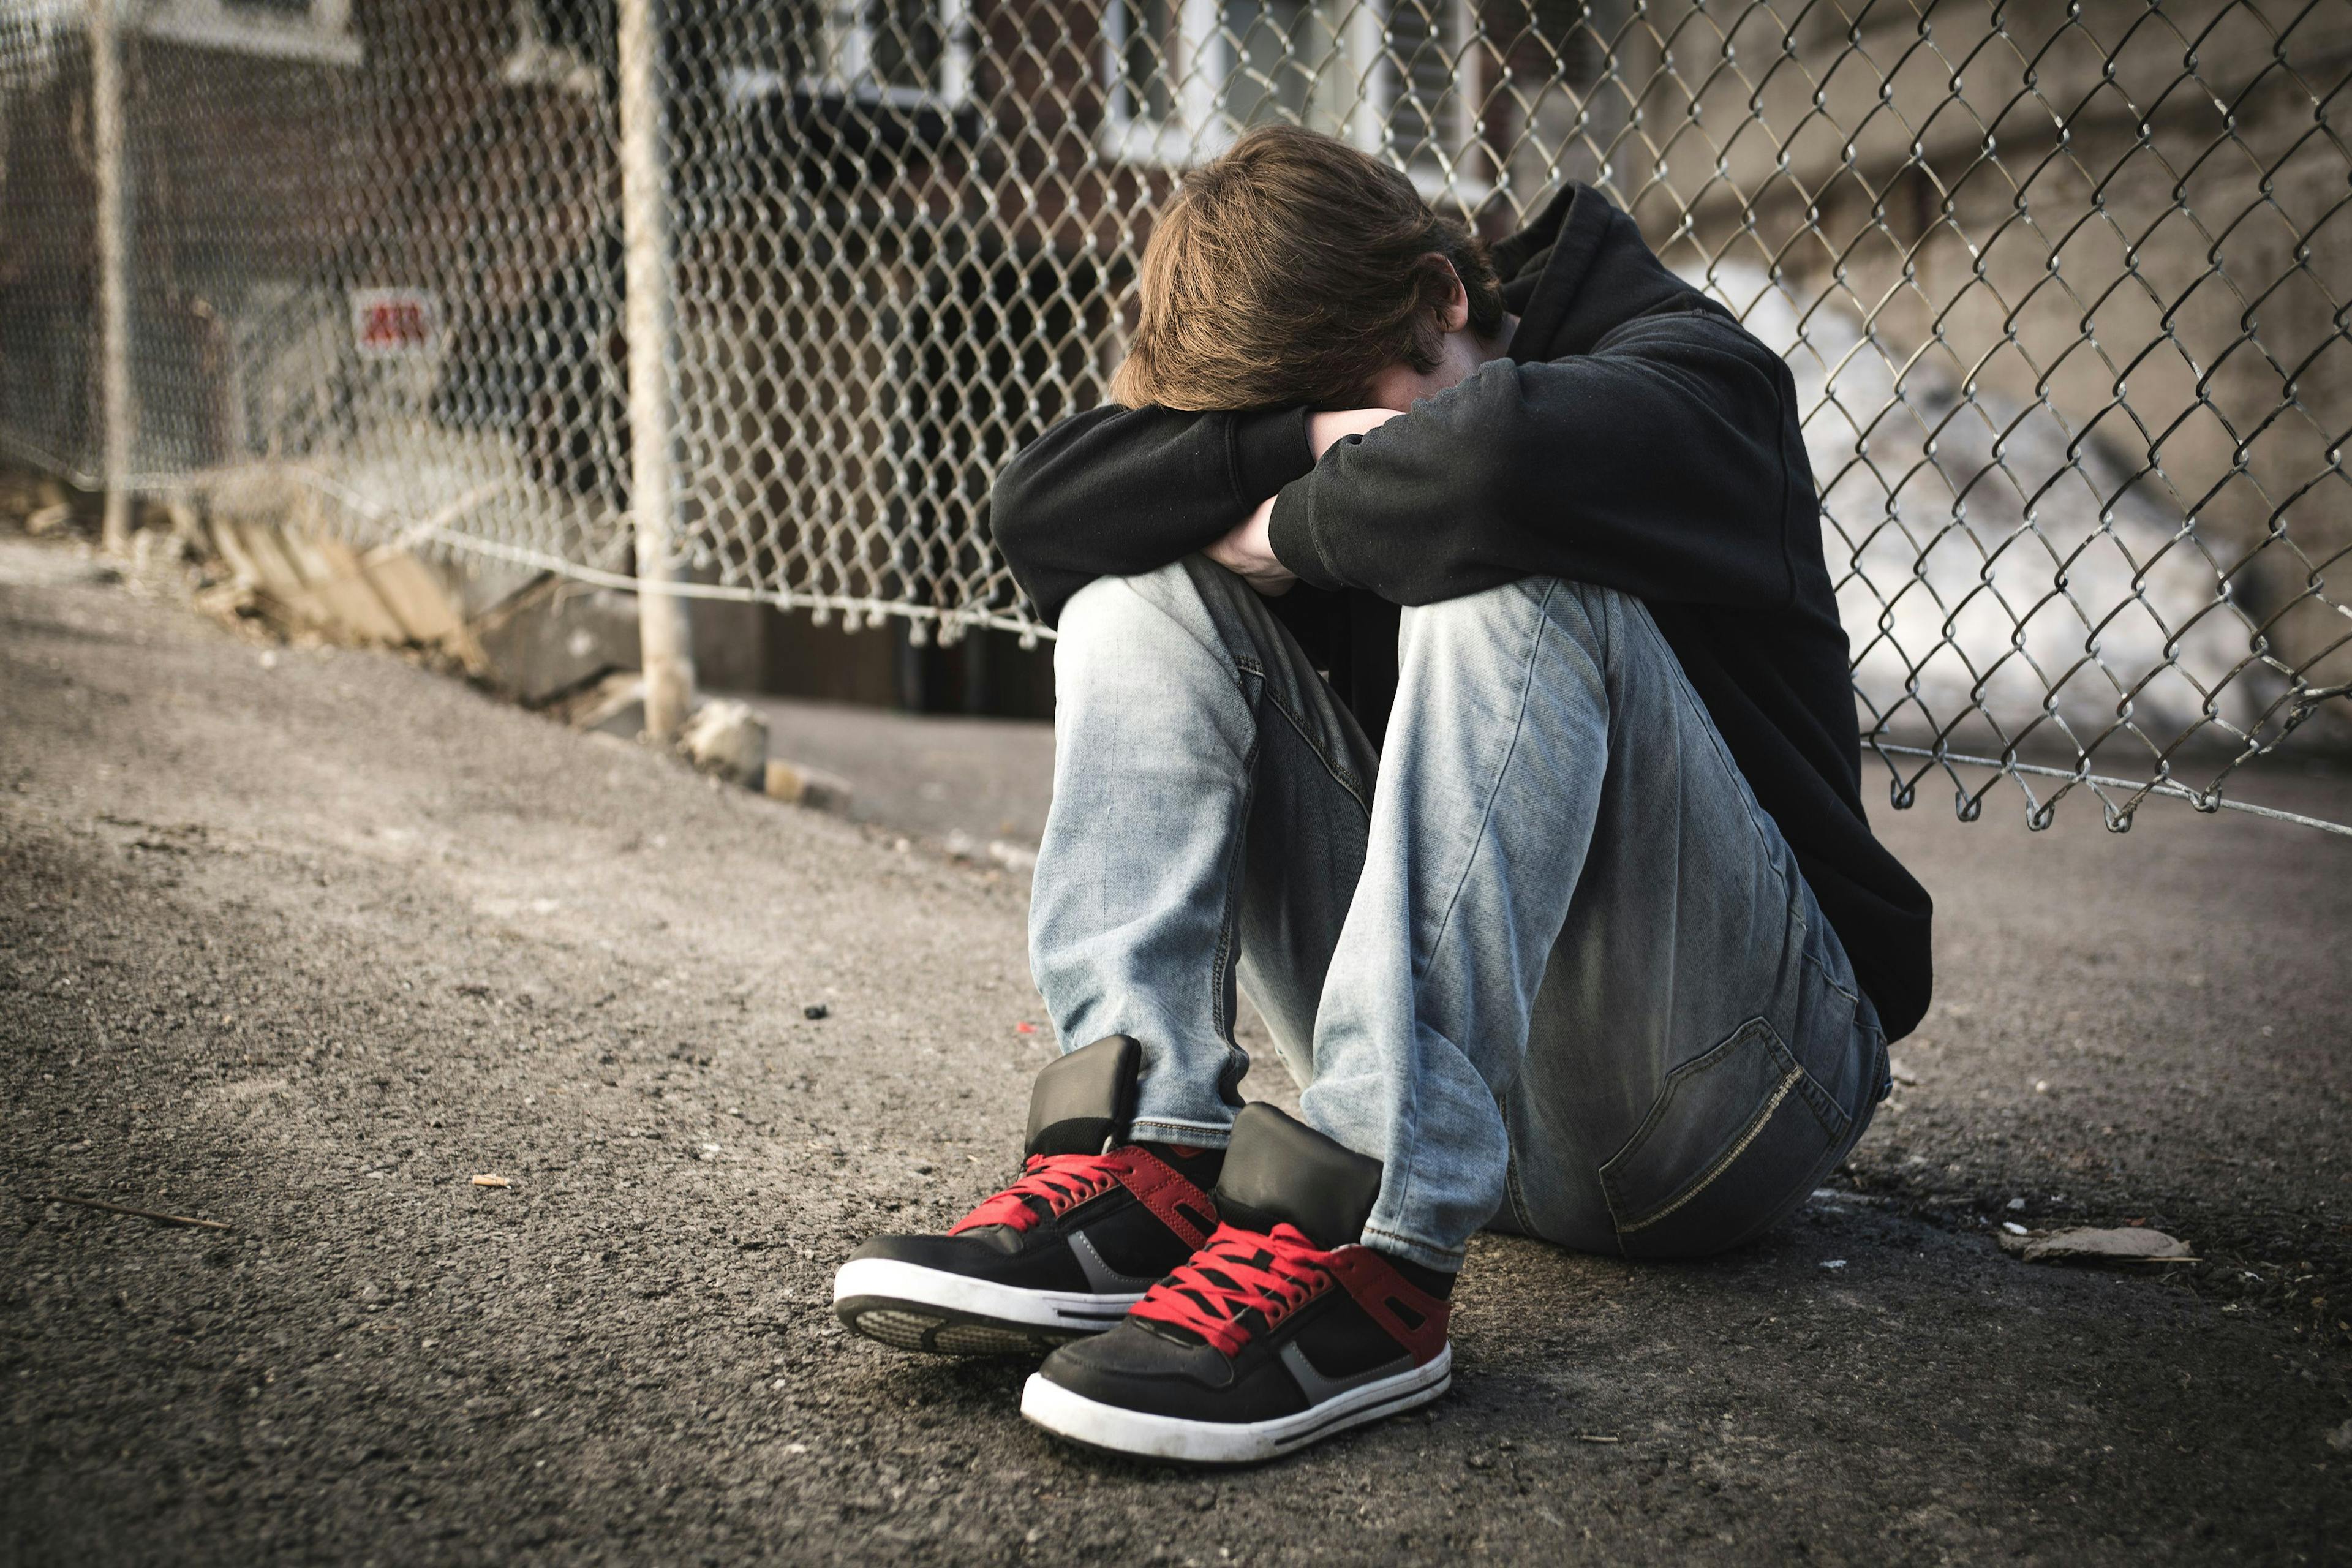 Traumatic events during COVID-19 lead to poor mental health in adolescents